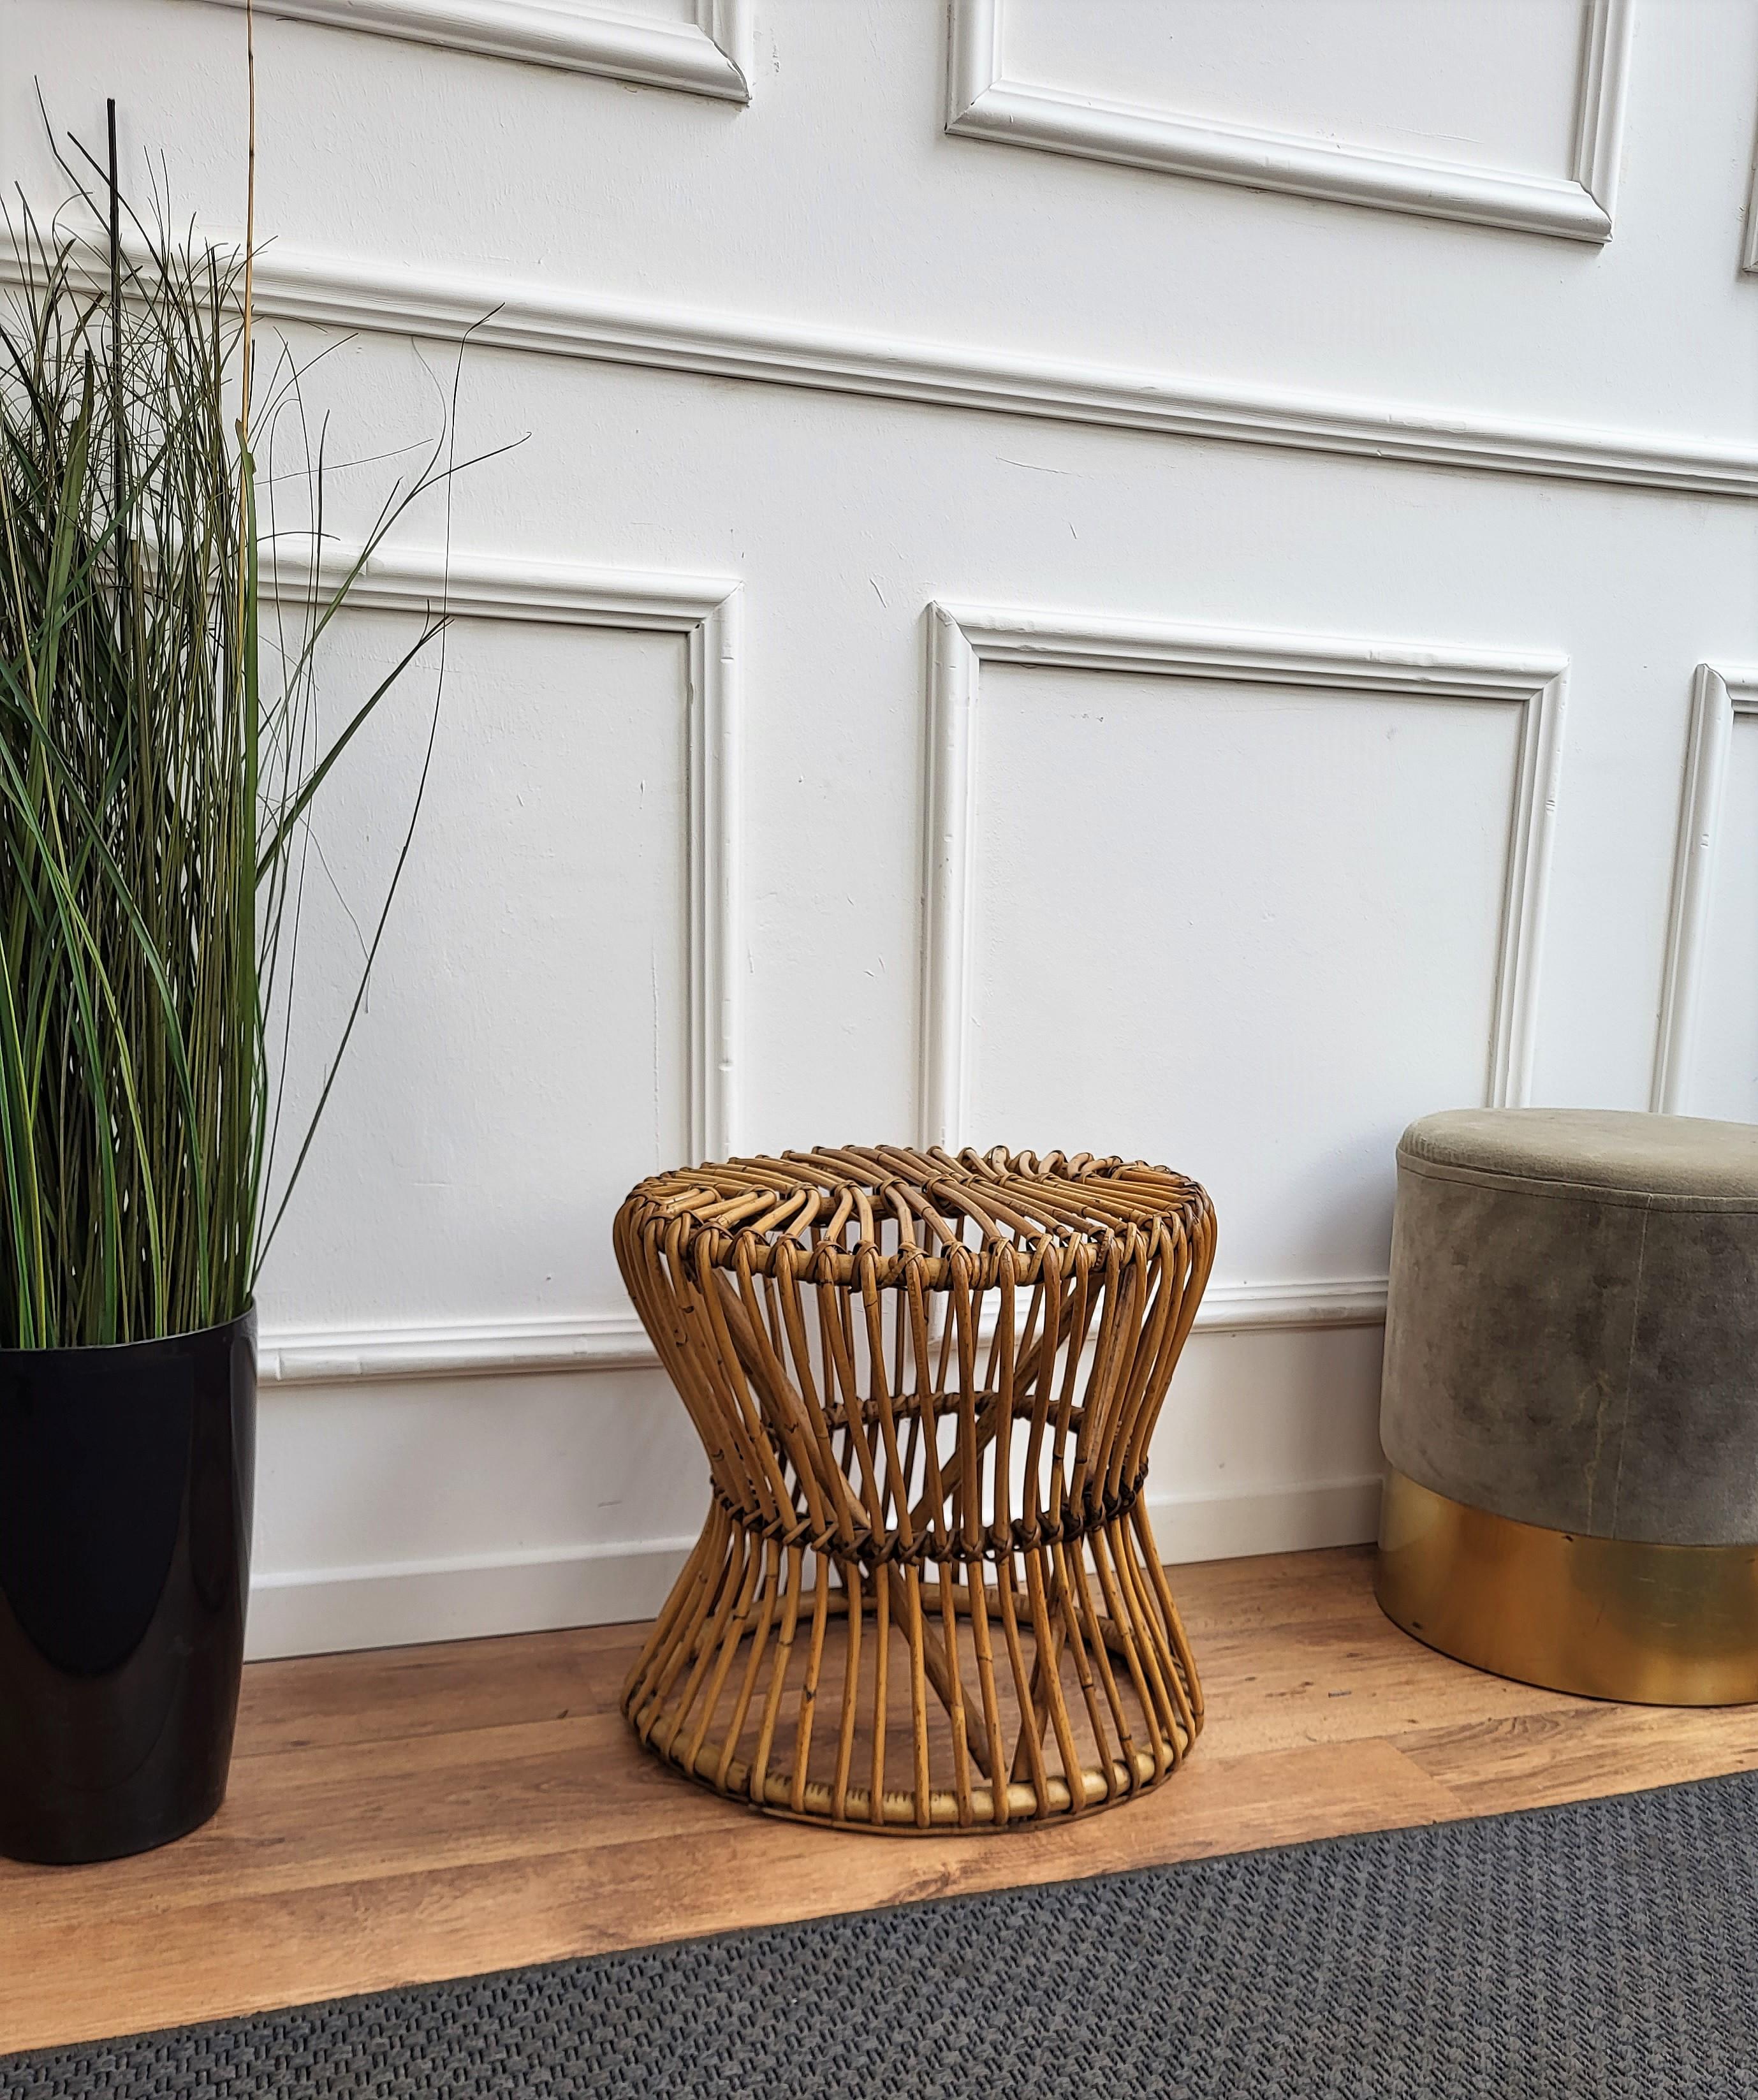 Beautiful 1960s Italian Mid-Century Modern designer stool, perfect in any room next to a sofa or in a bedroom as well as in any bathroom. This charming piece is in the typical style of Audoux and Minet where the organic beauty of the woven materials